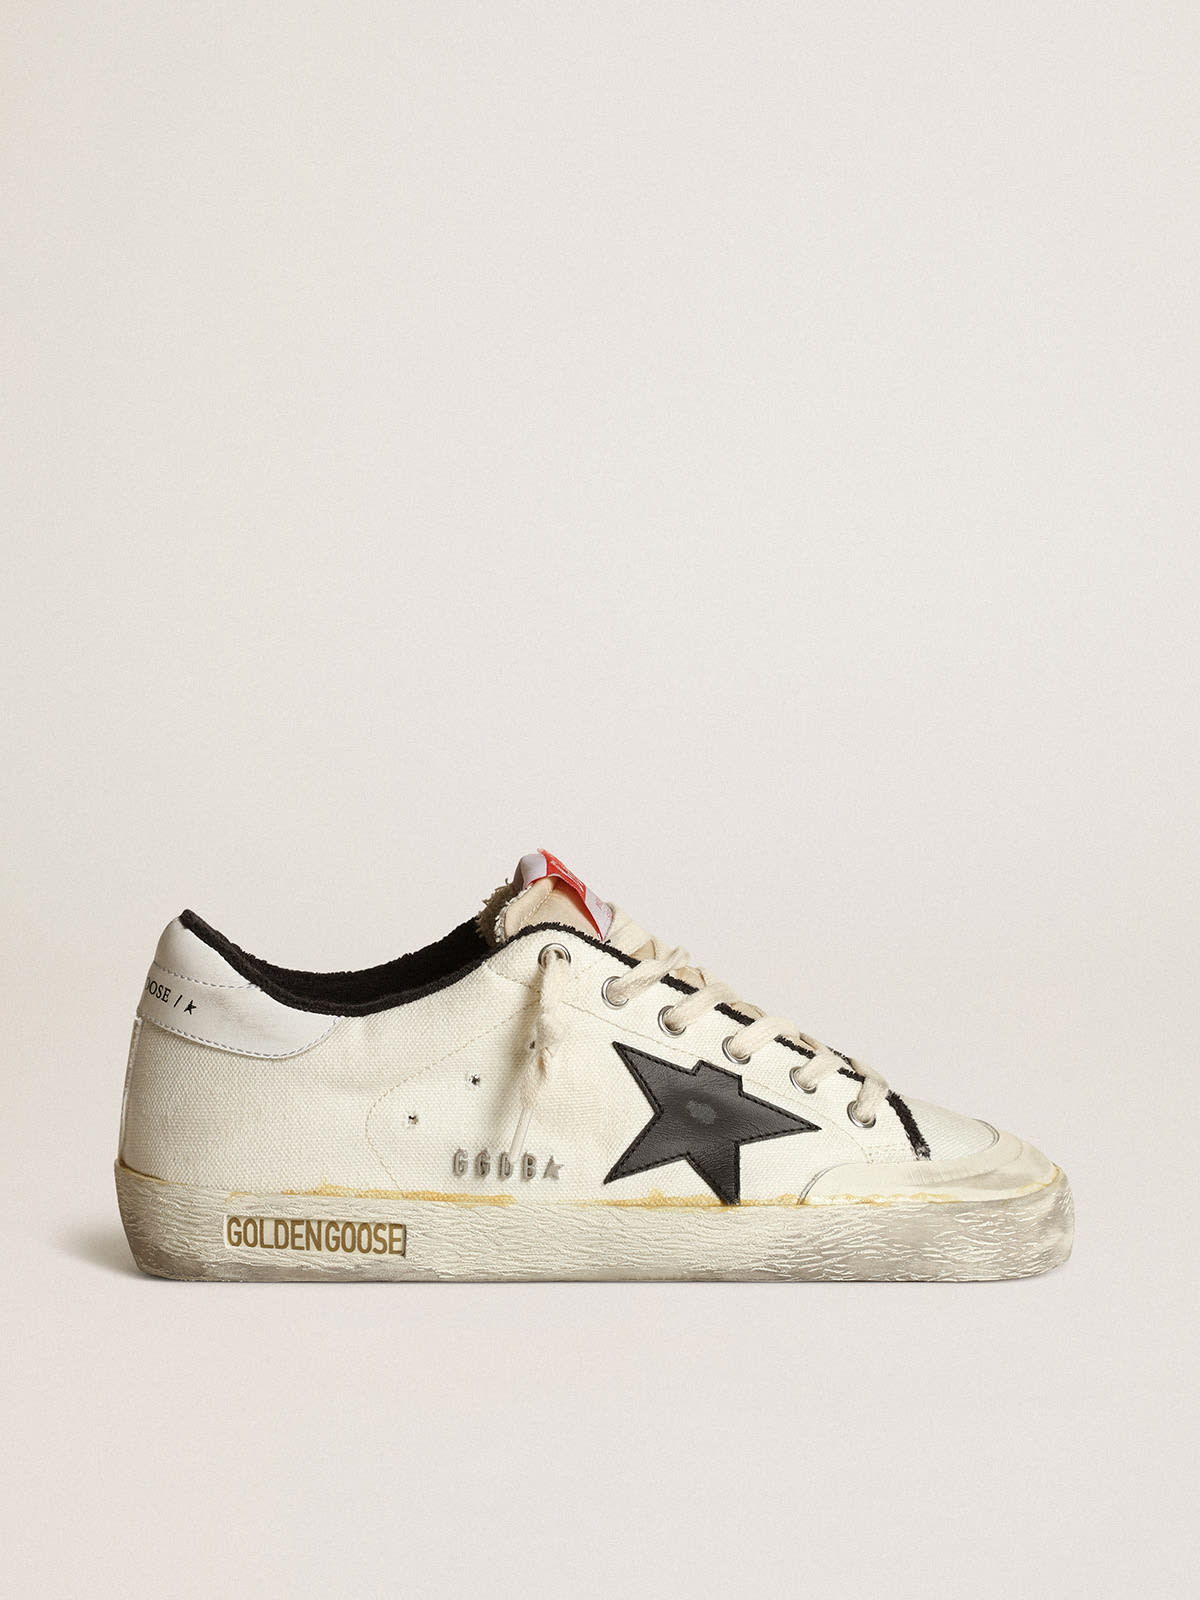 golden goose sneakers beige black Super-Star and with star Women’s leather heel LTD white canvas in tab